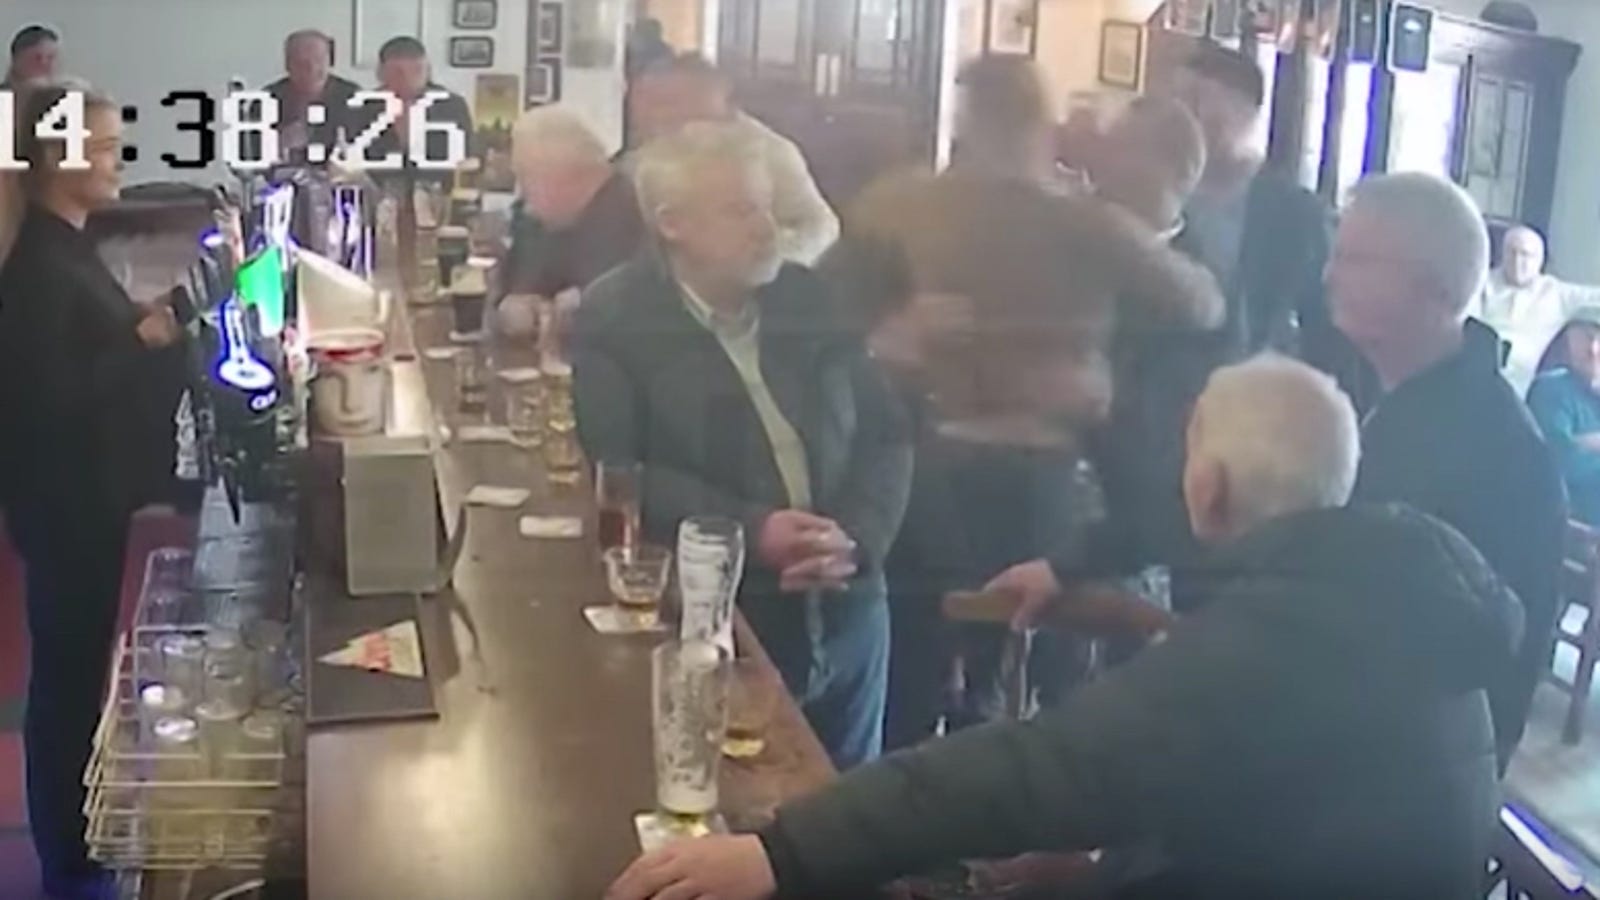 Flipboard: Conor McGregor Sucker-Punches Old Man After Whiskey Argument In Dublin Pub1600 x 900